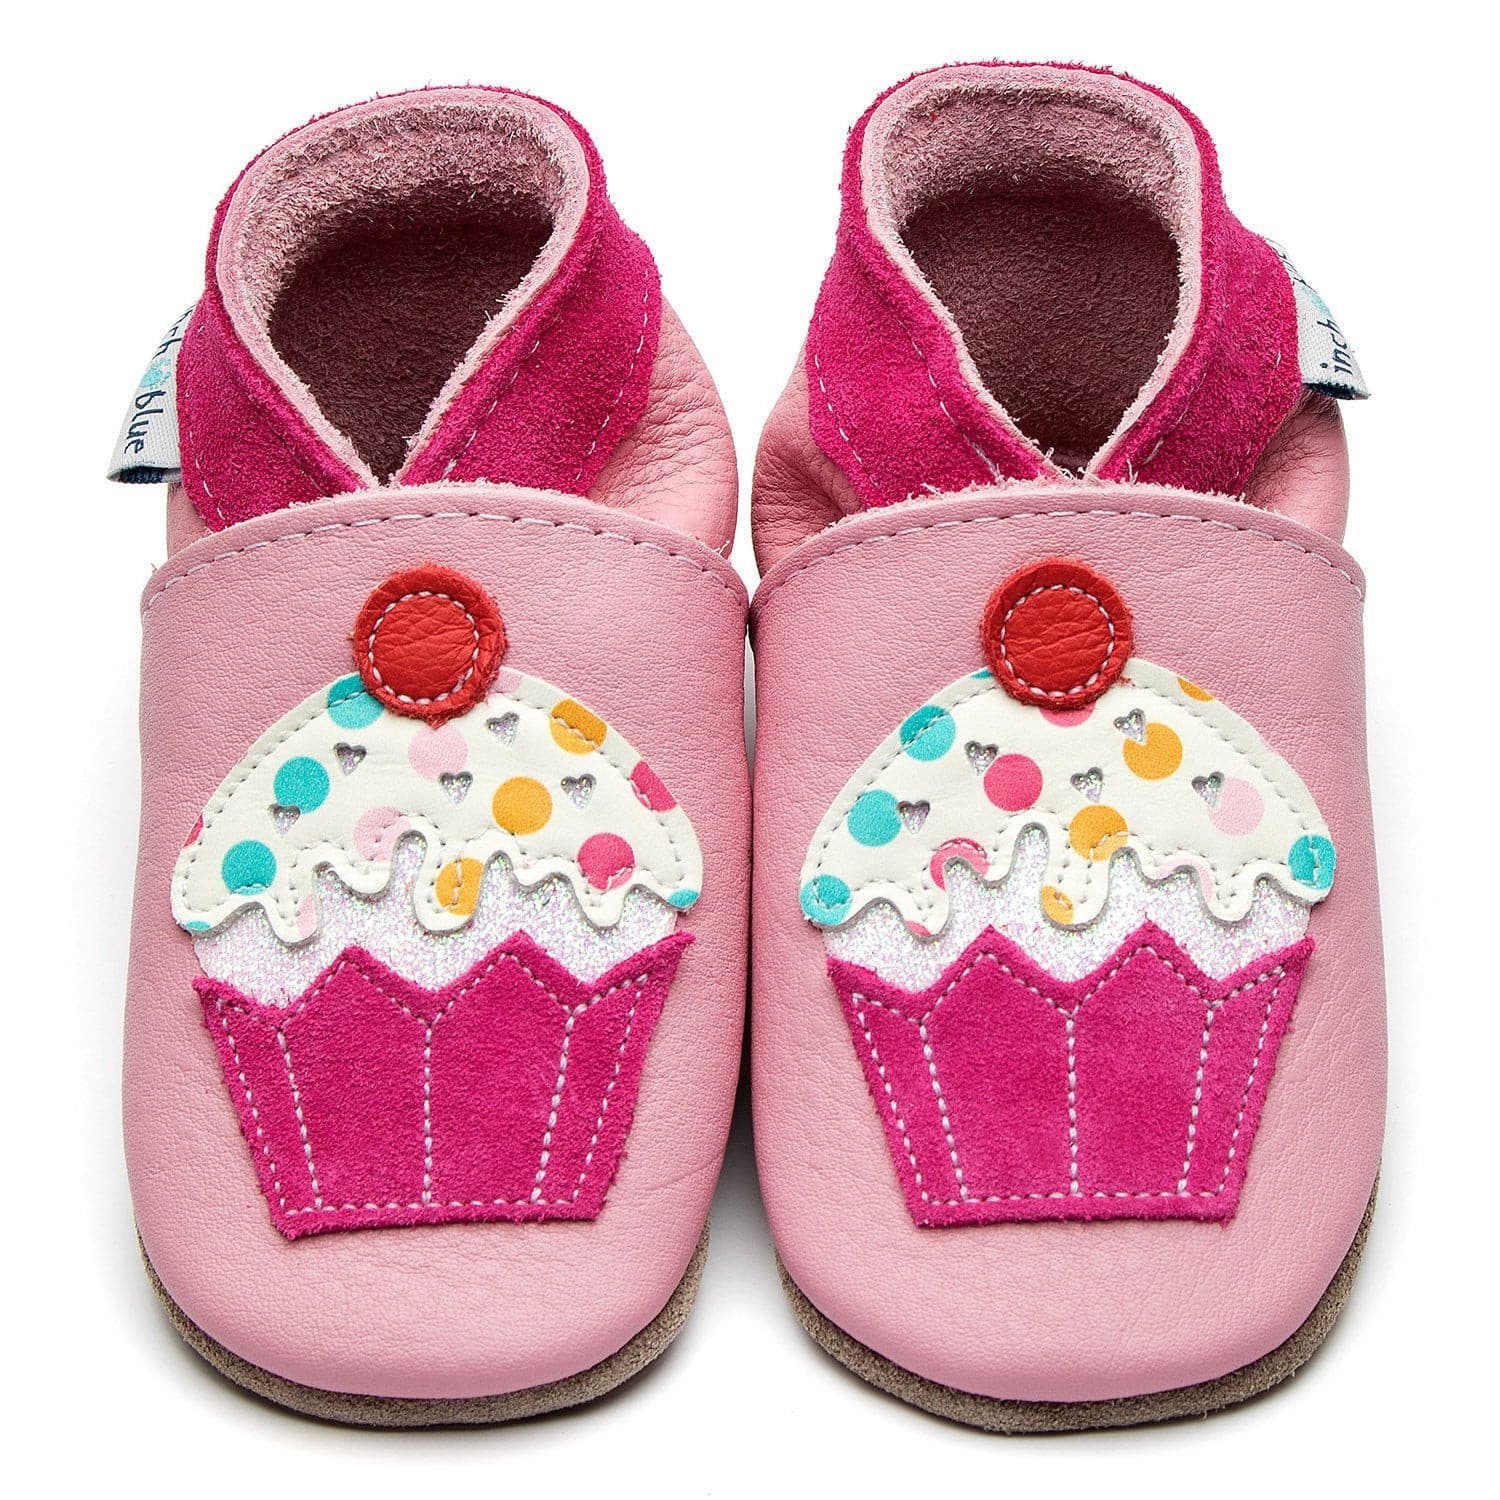 Little Cupcake Soft Shoes.